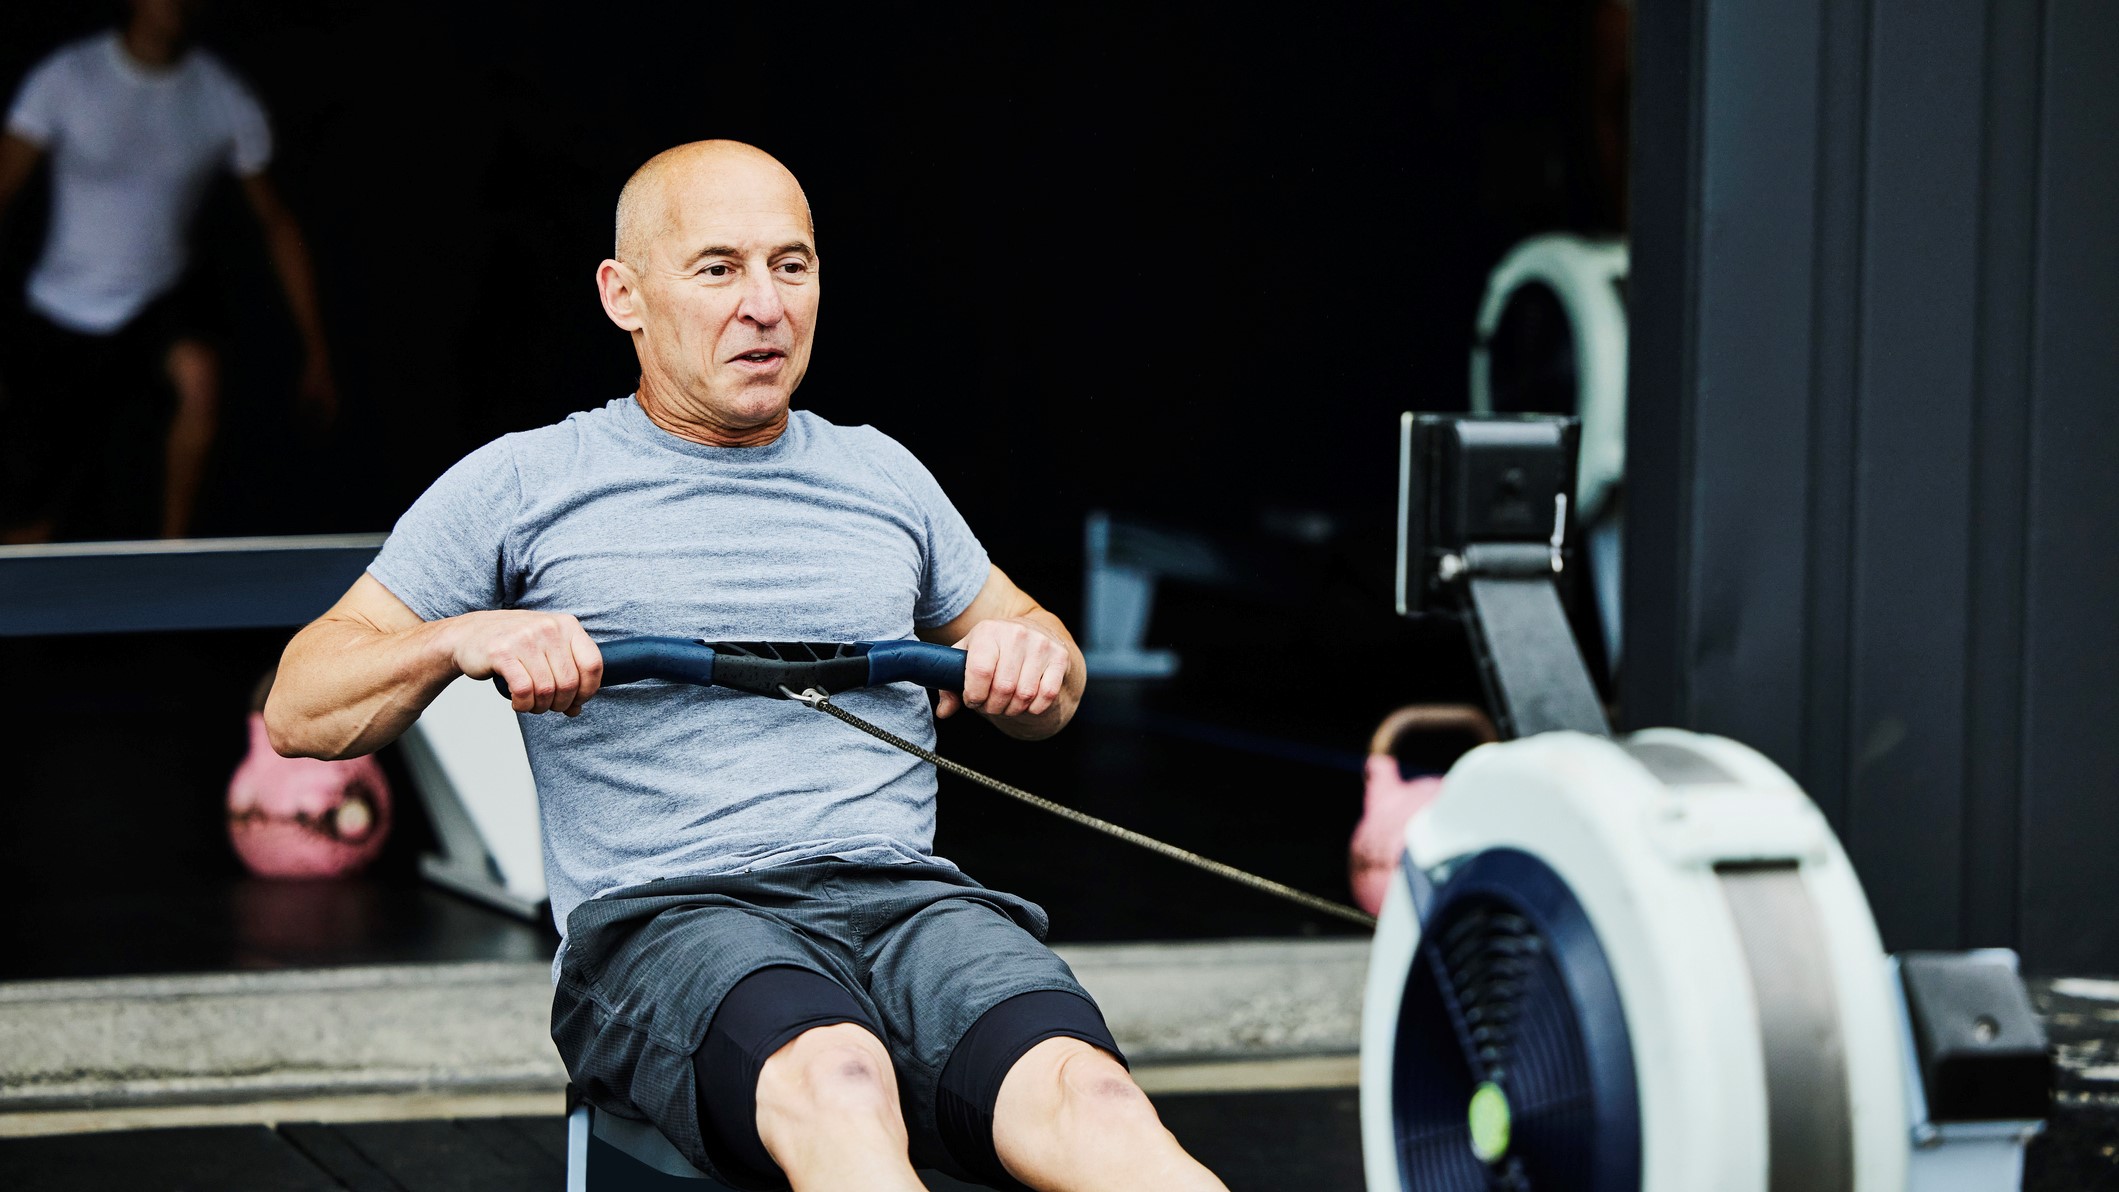 person using rowing machine